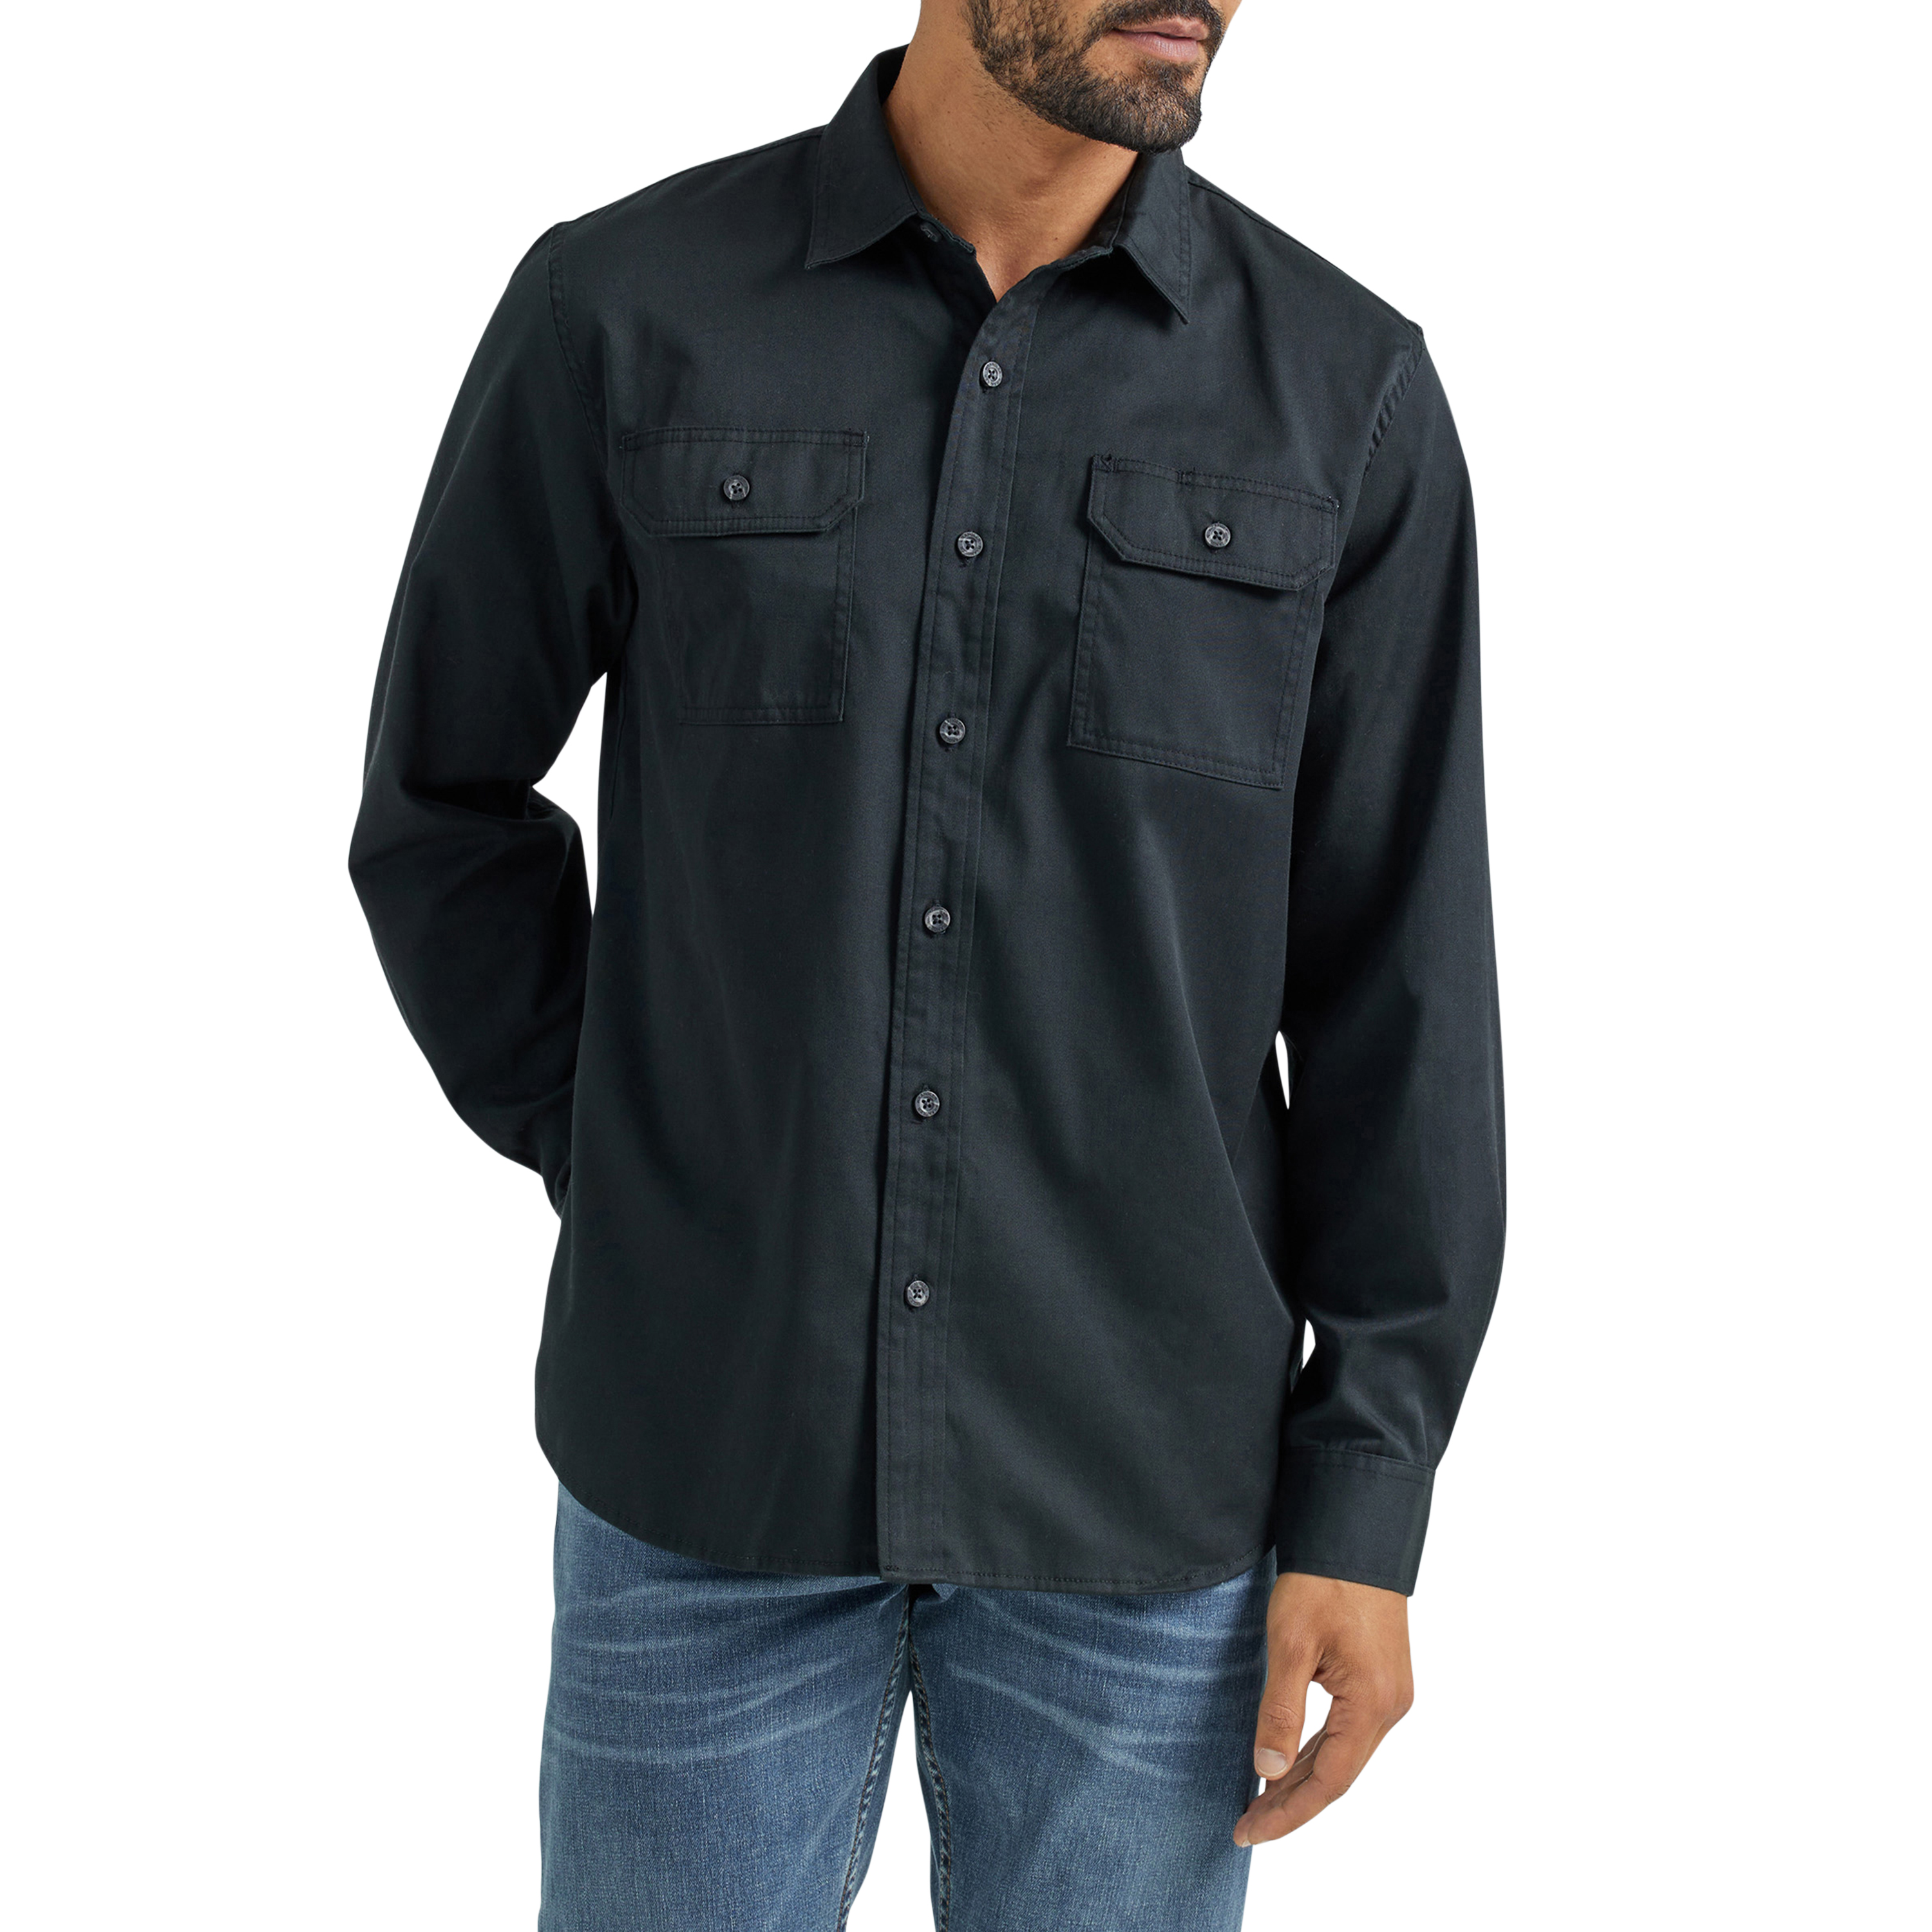 Wrangler® Men's and Big Men's Relaxed Fit Long Sleeve Woven Shirt, Sizes S-5XL - image 1 of 4